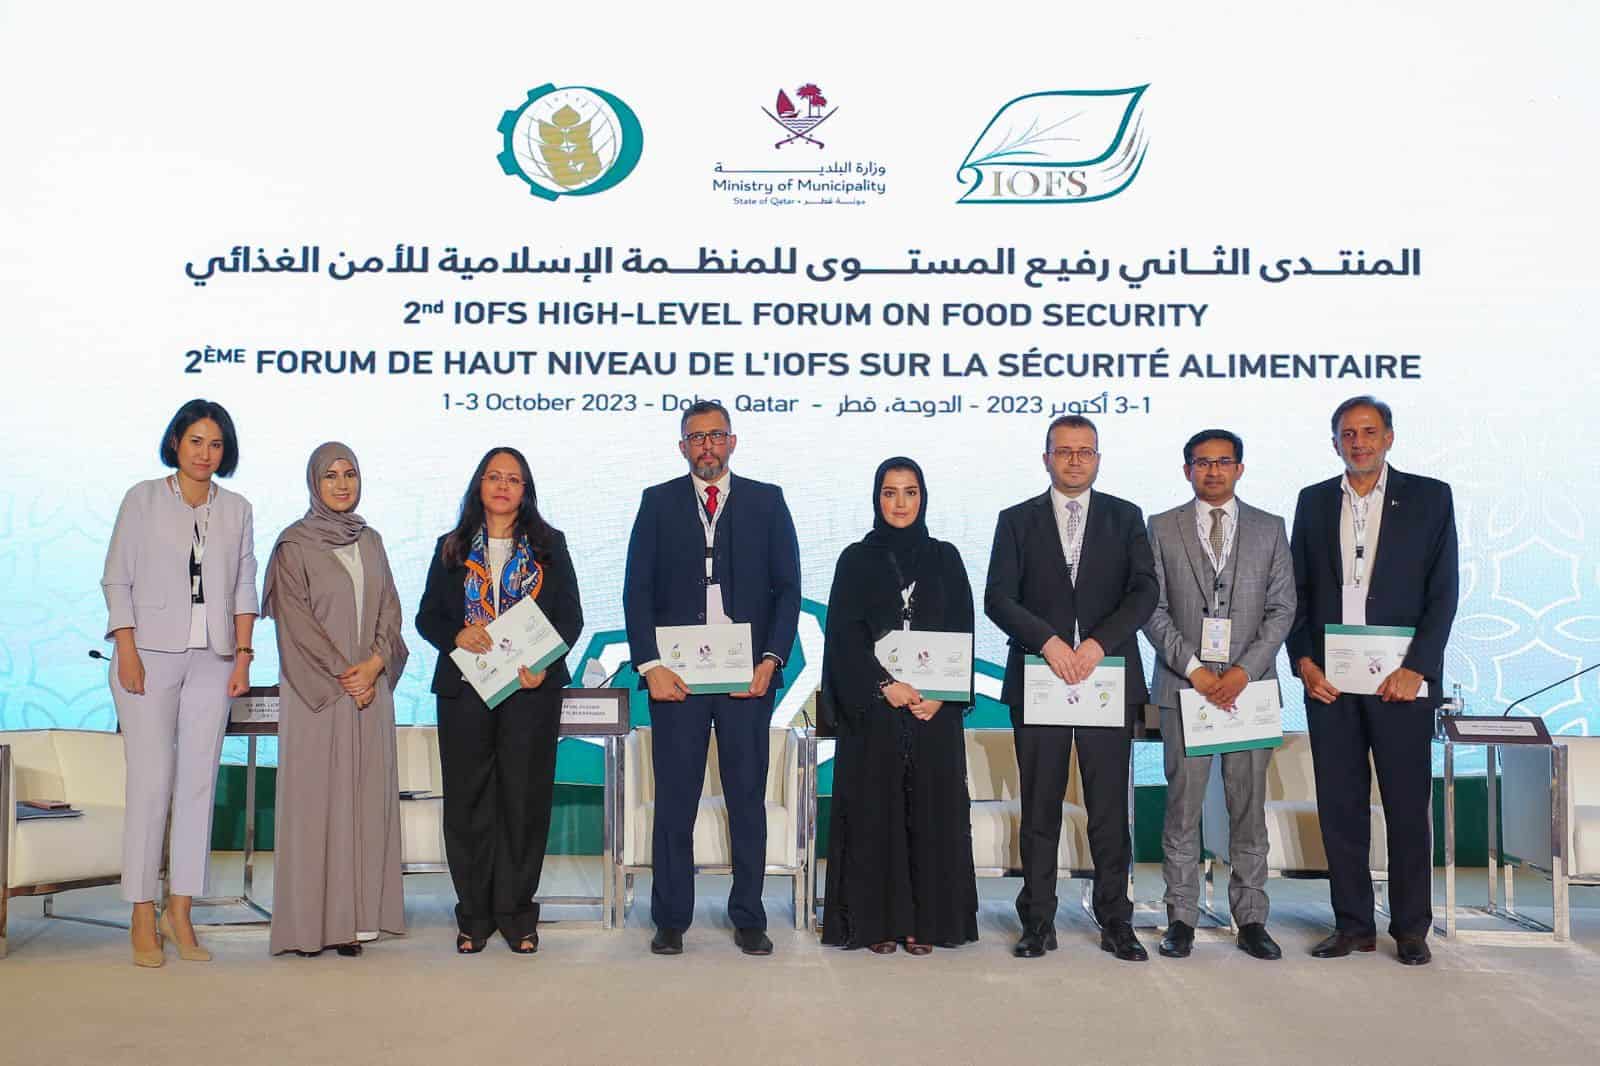 2nd High-Level Forum for Food Security of the OIC